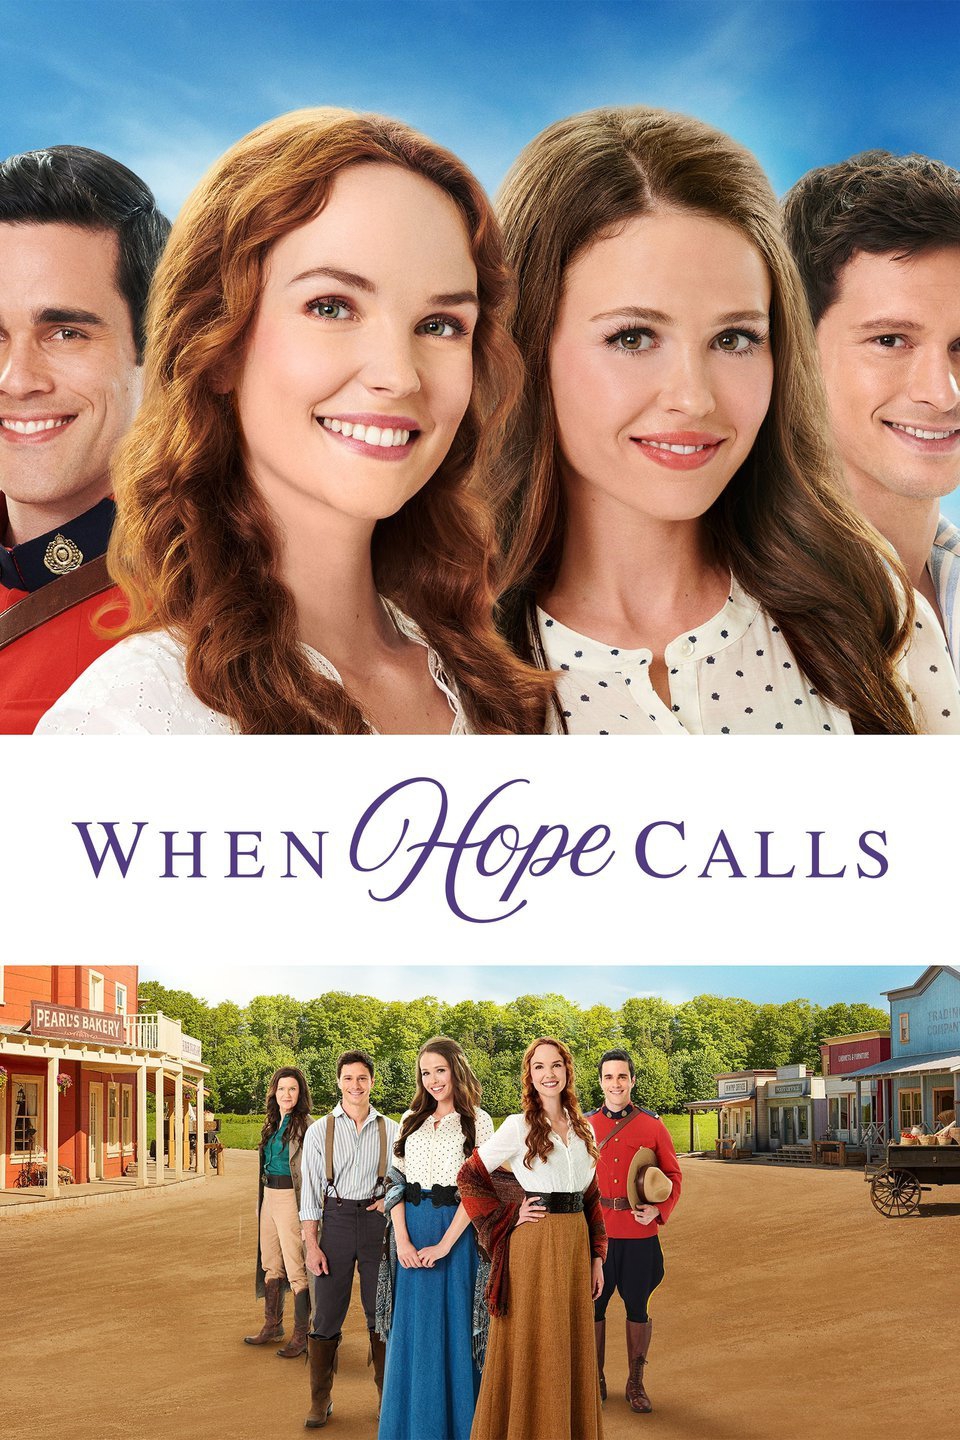 When Hope Calls Season 1 Episodes Streaming Online | Free Trial | The - What Channel Will When Hope Calls Be On